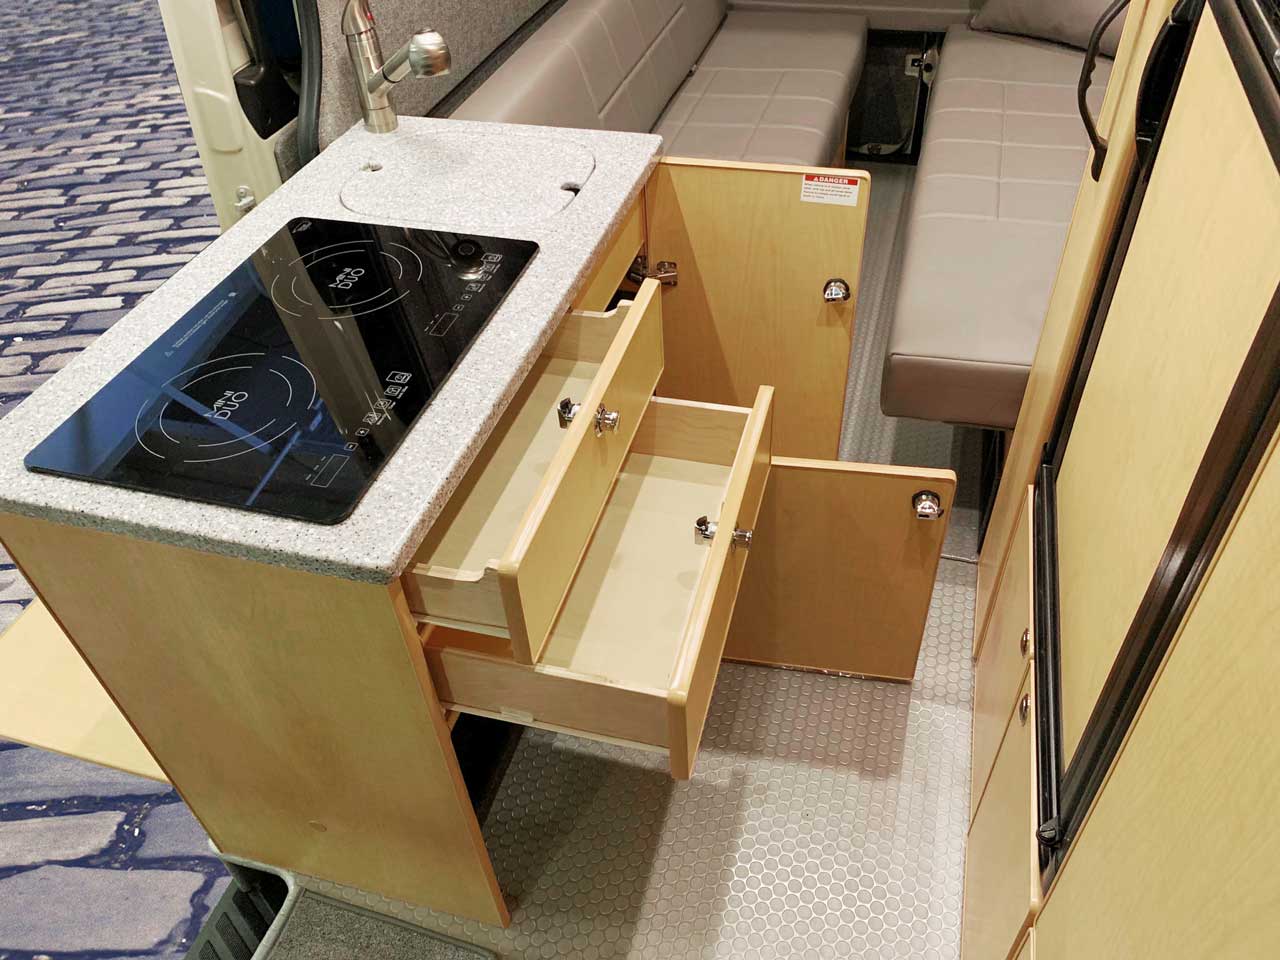 Galley features cooktop and cabinets.